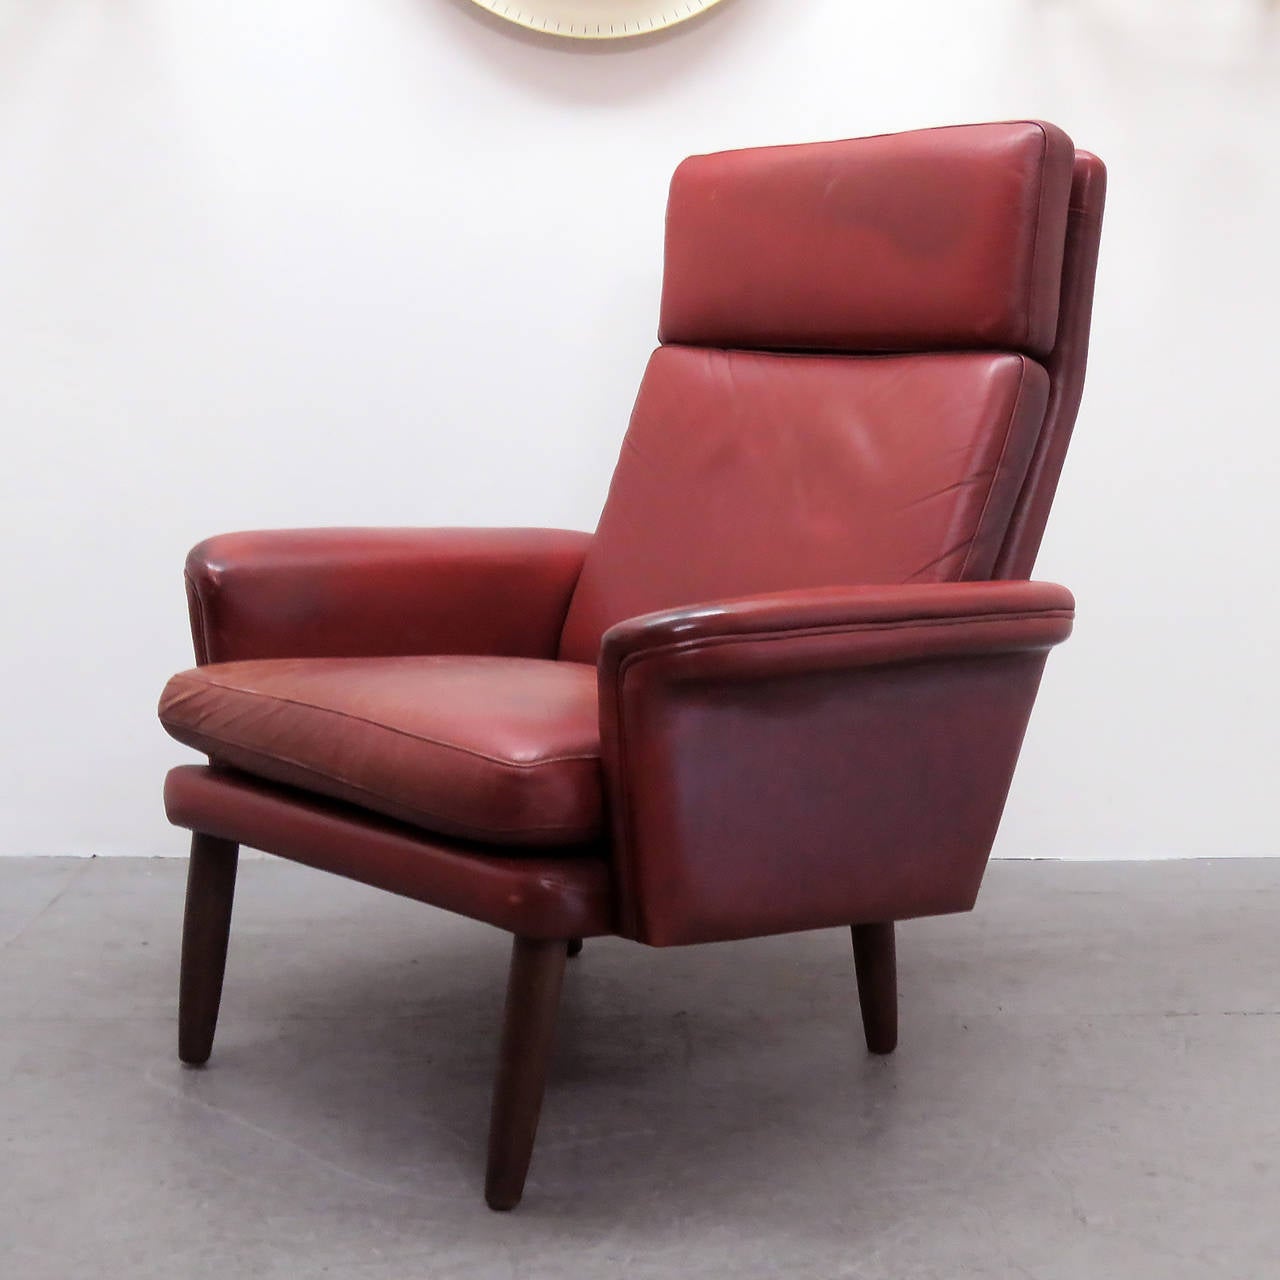 Great Danish high back leather lounge chair in well-aged red leather with loose down cushions and teak legs.